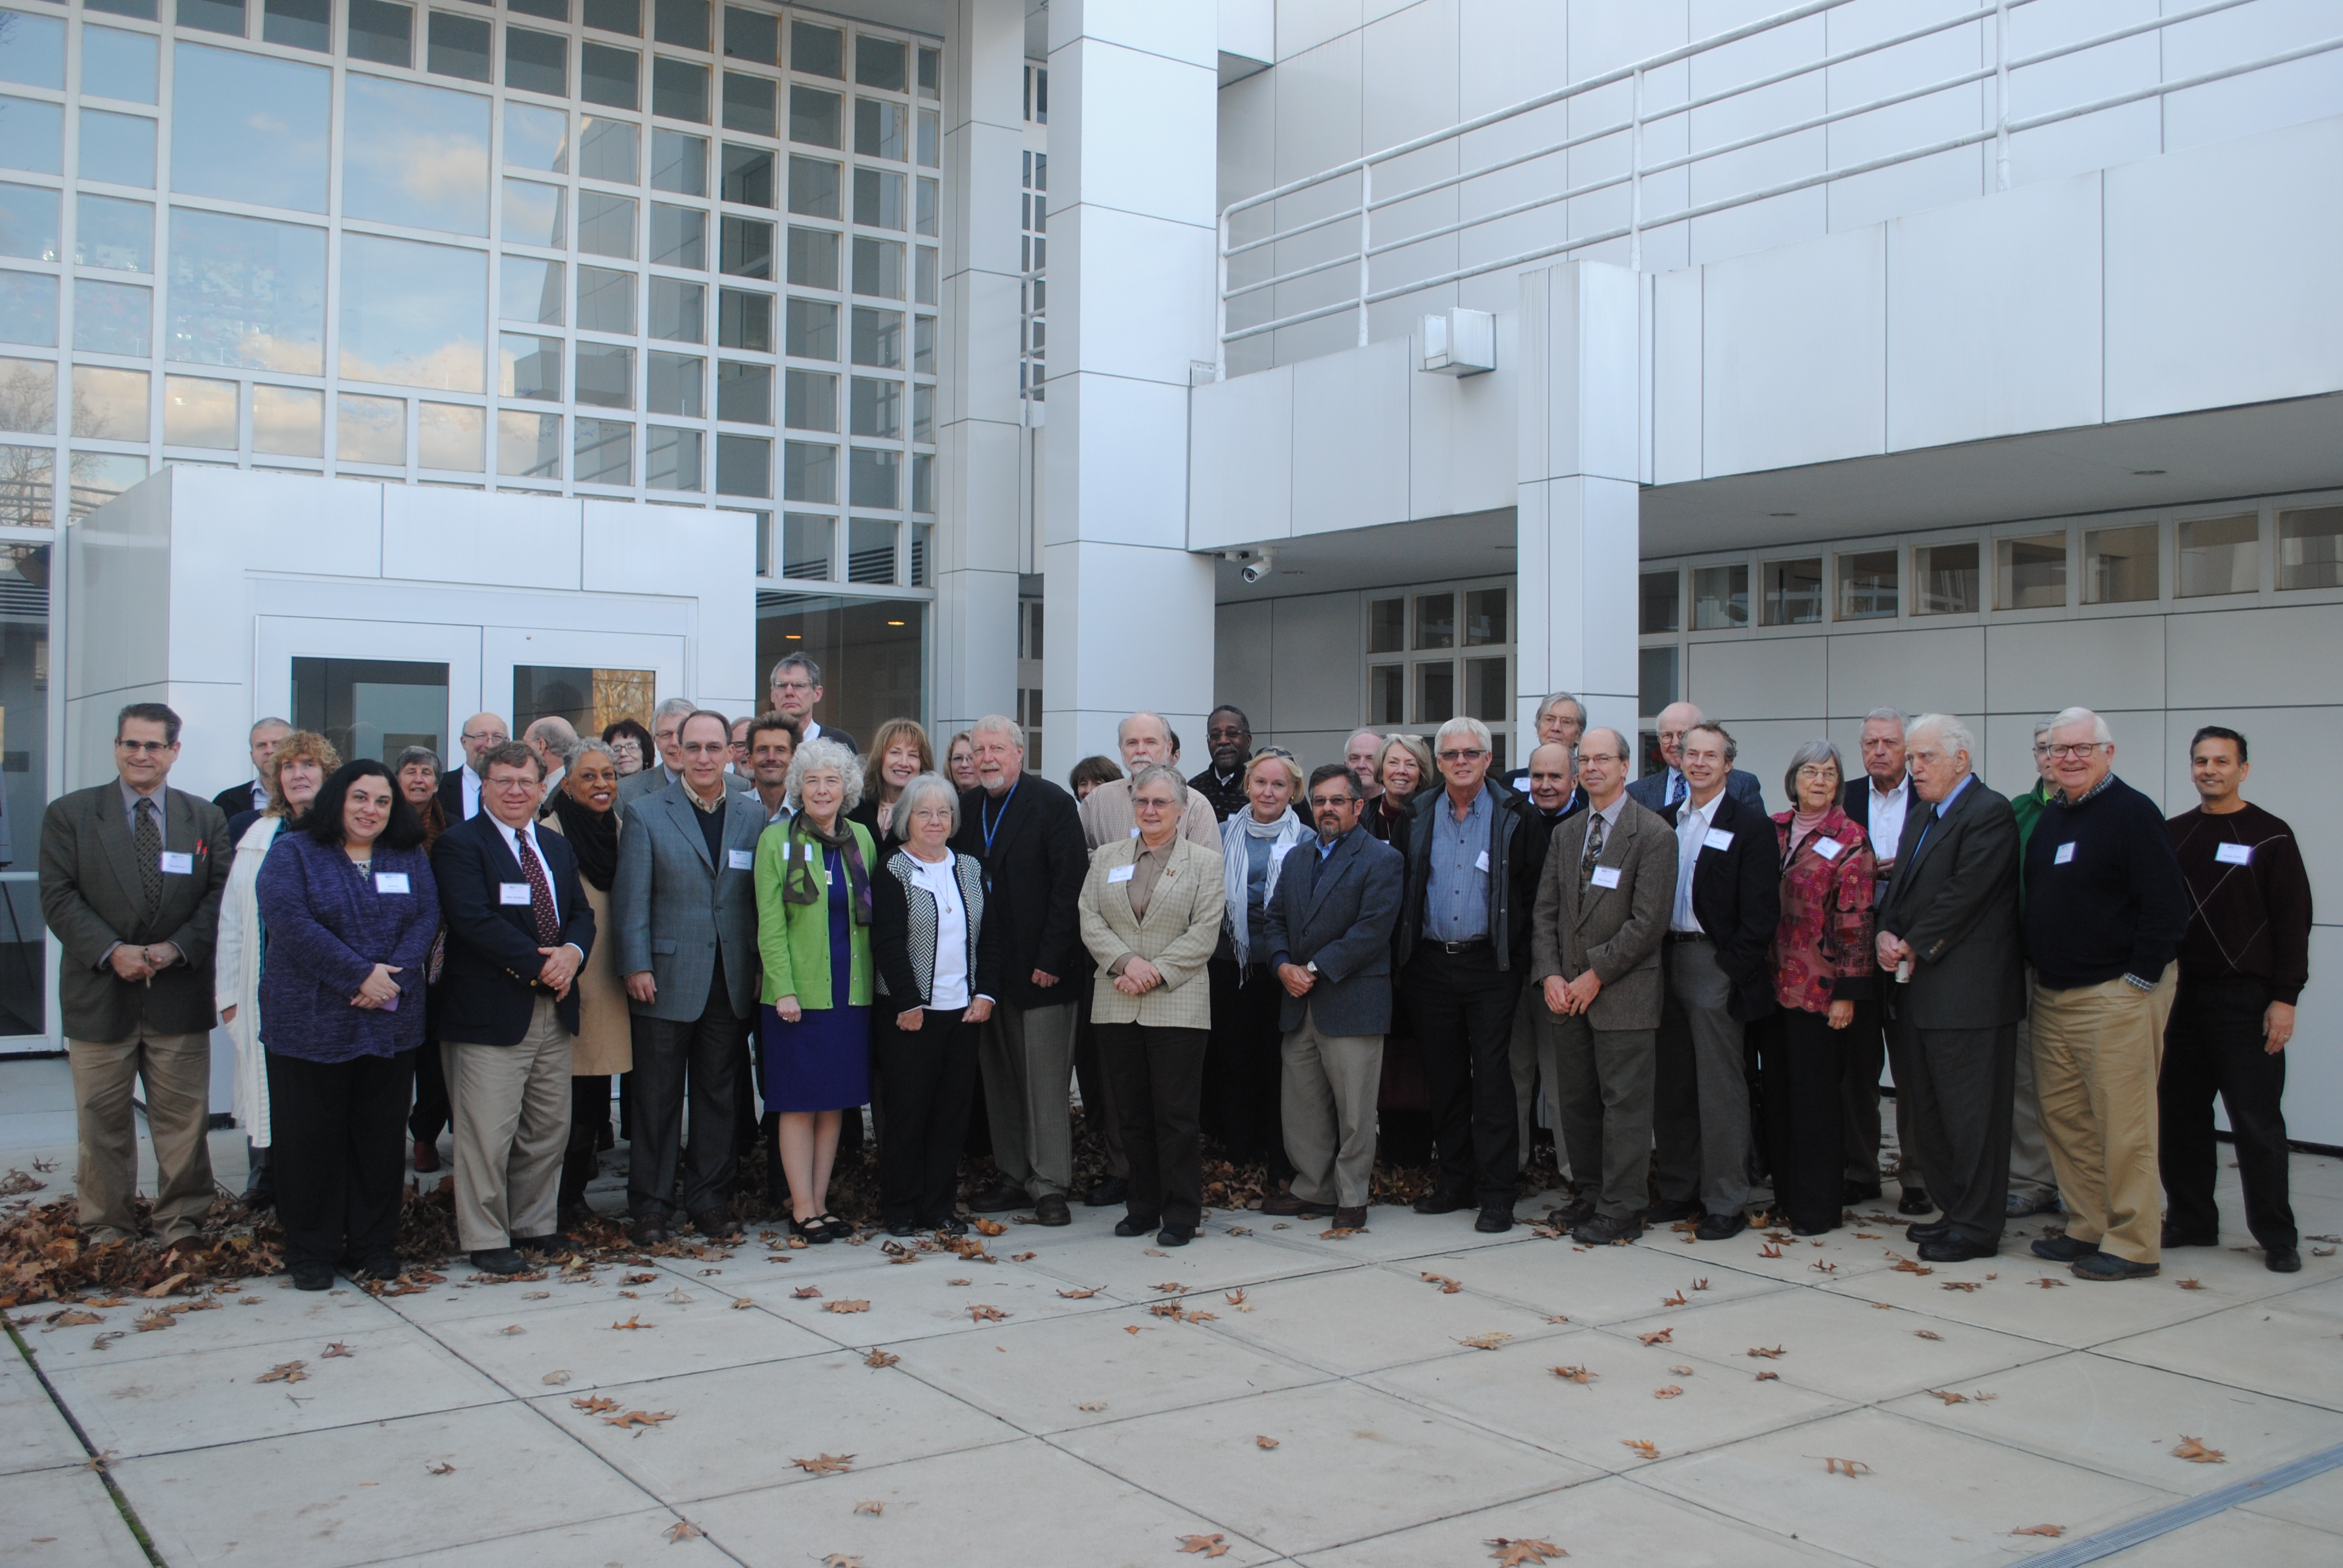 Attendees of the Changing Religious Landscape Conference